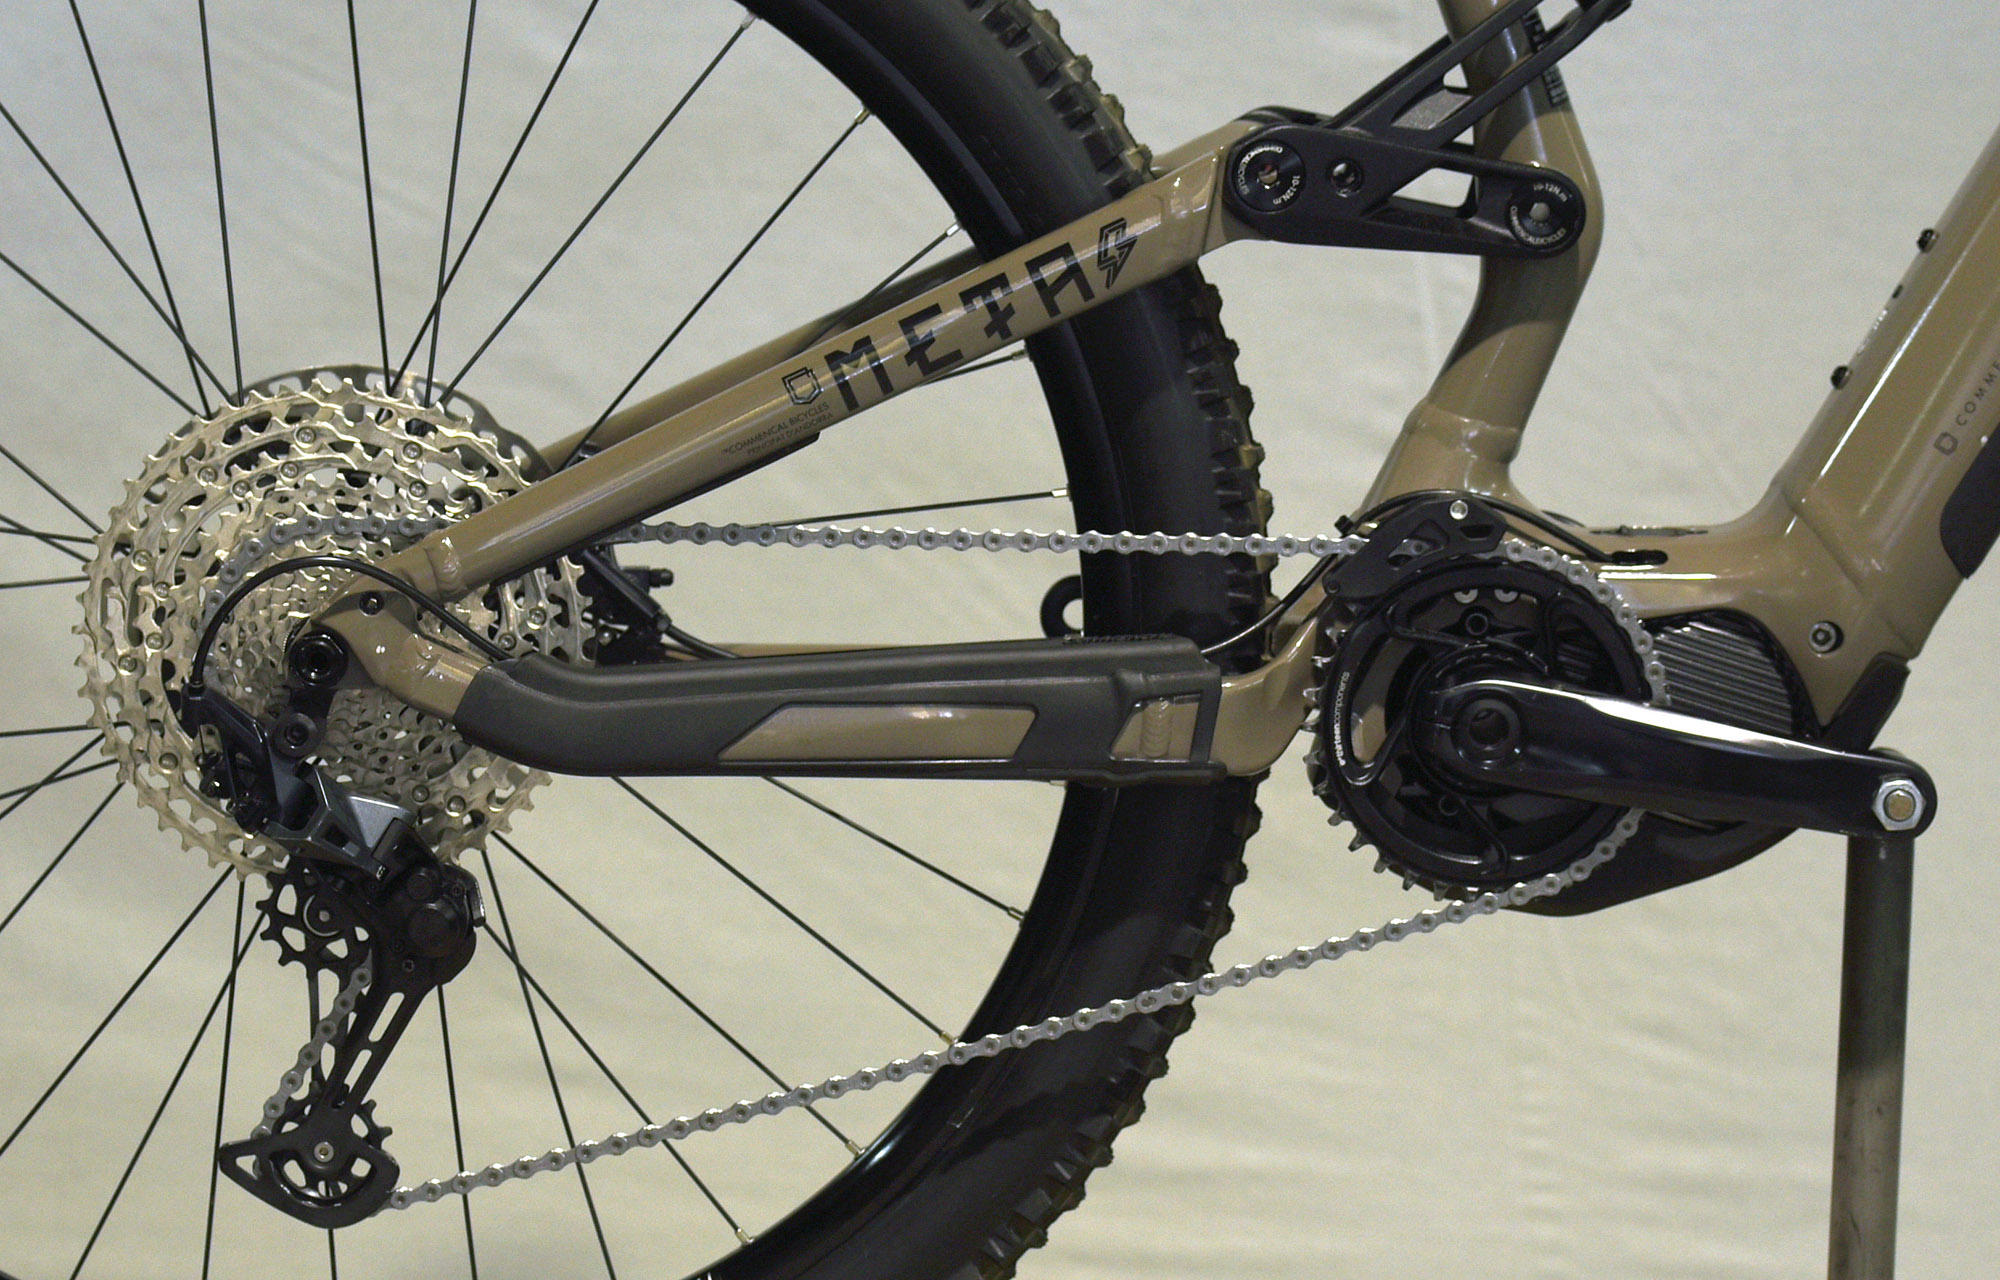 COMMENCAL META POWER 29 SHIMANO ESSENTIAL DIRT - XL (21181504) 559km image number null